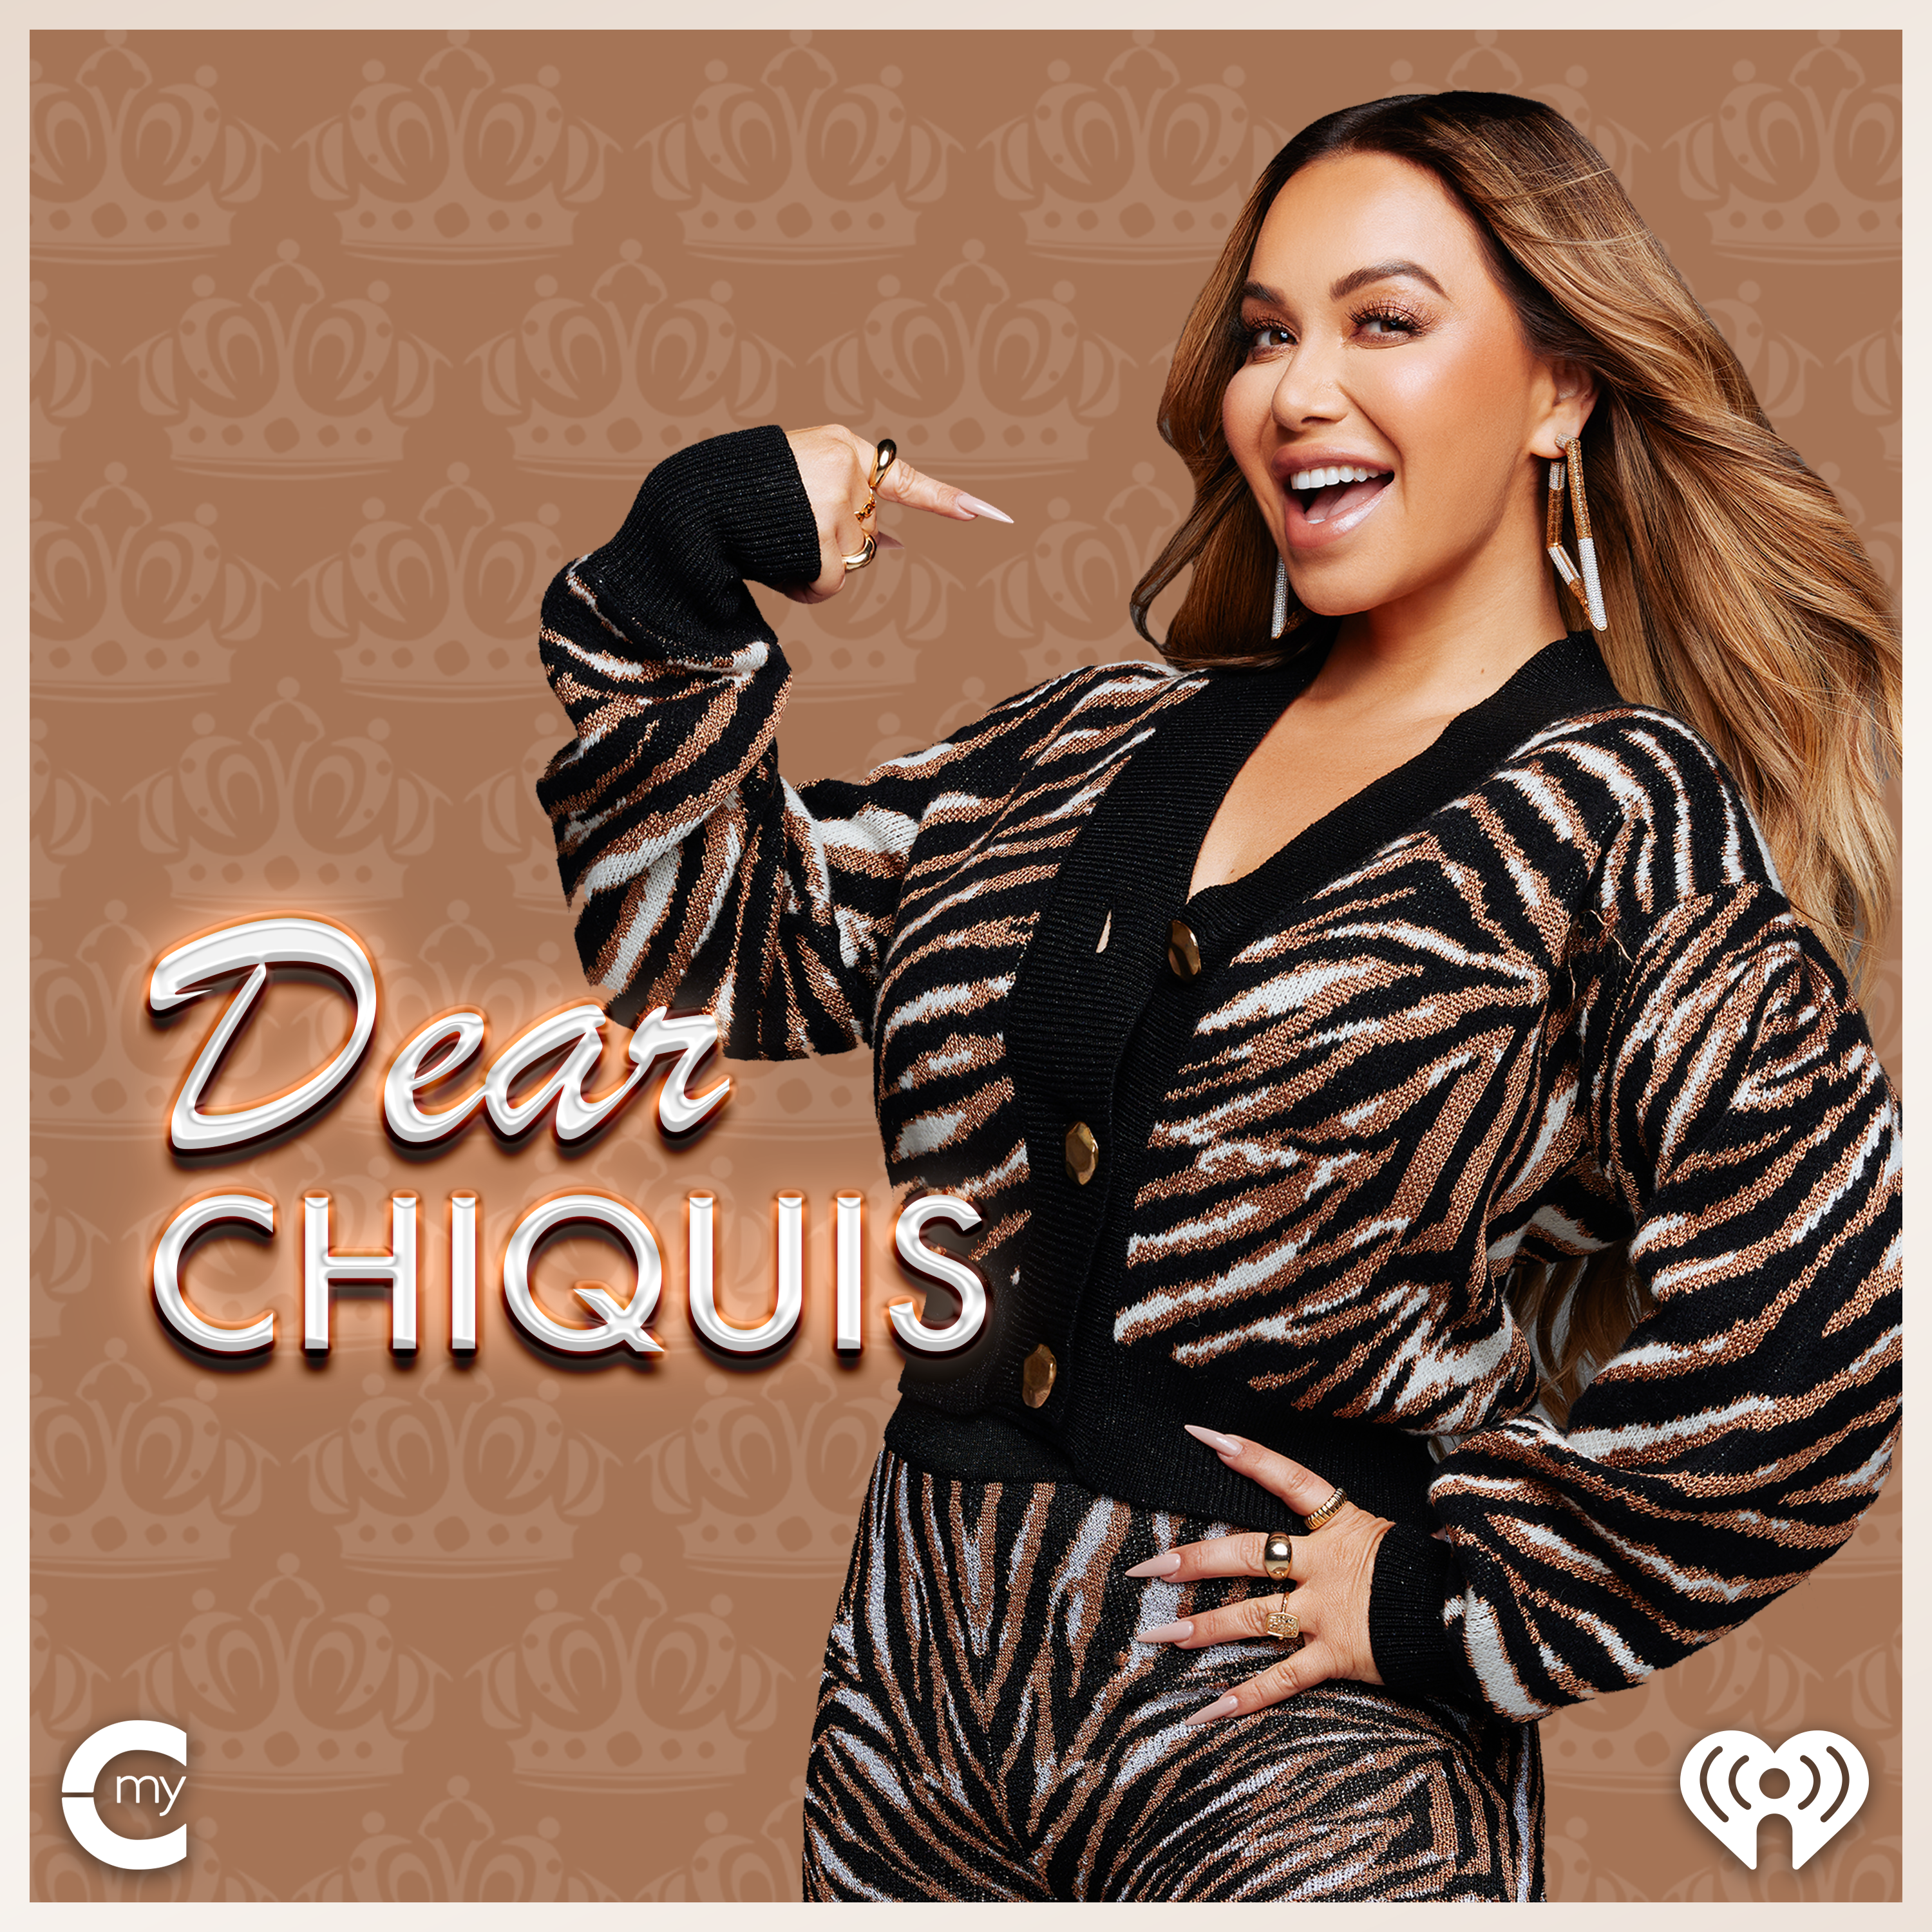 Dear Chiquis: How Can I Become Extroverted? When to Give Up on Making Amends with Family and Starting a Business Without Money